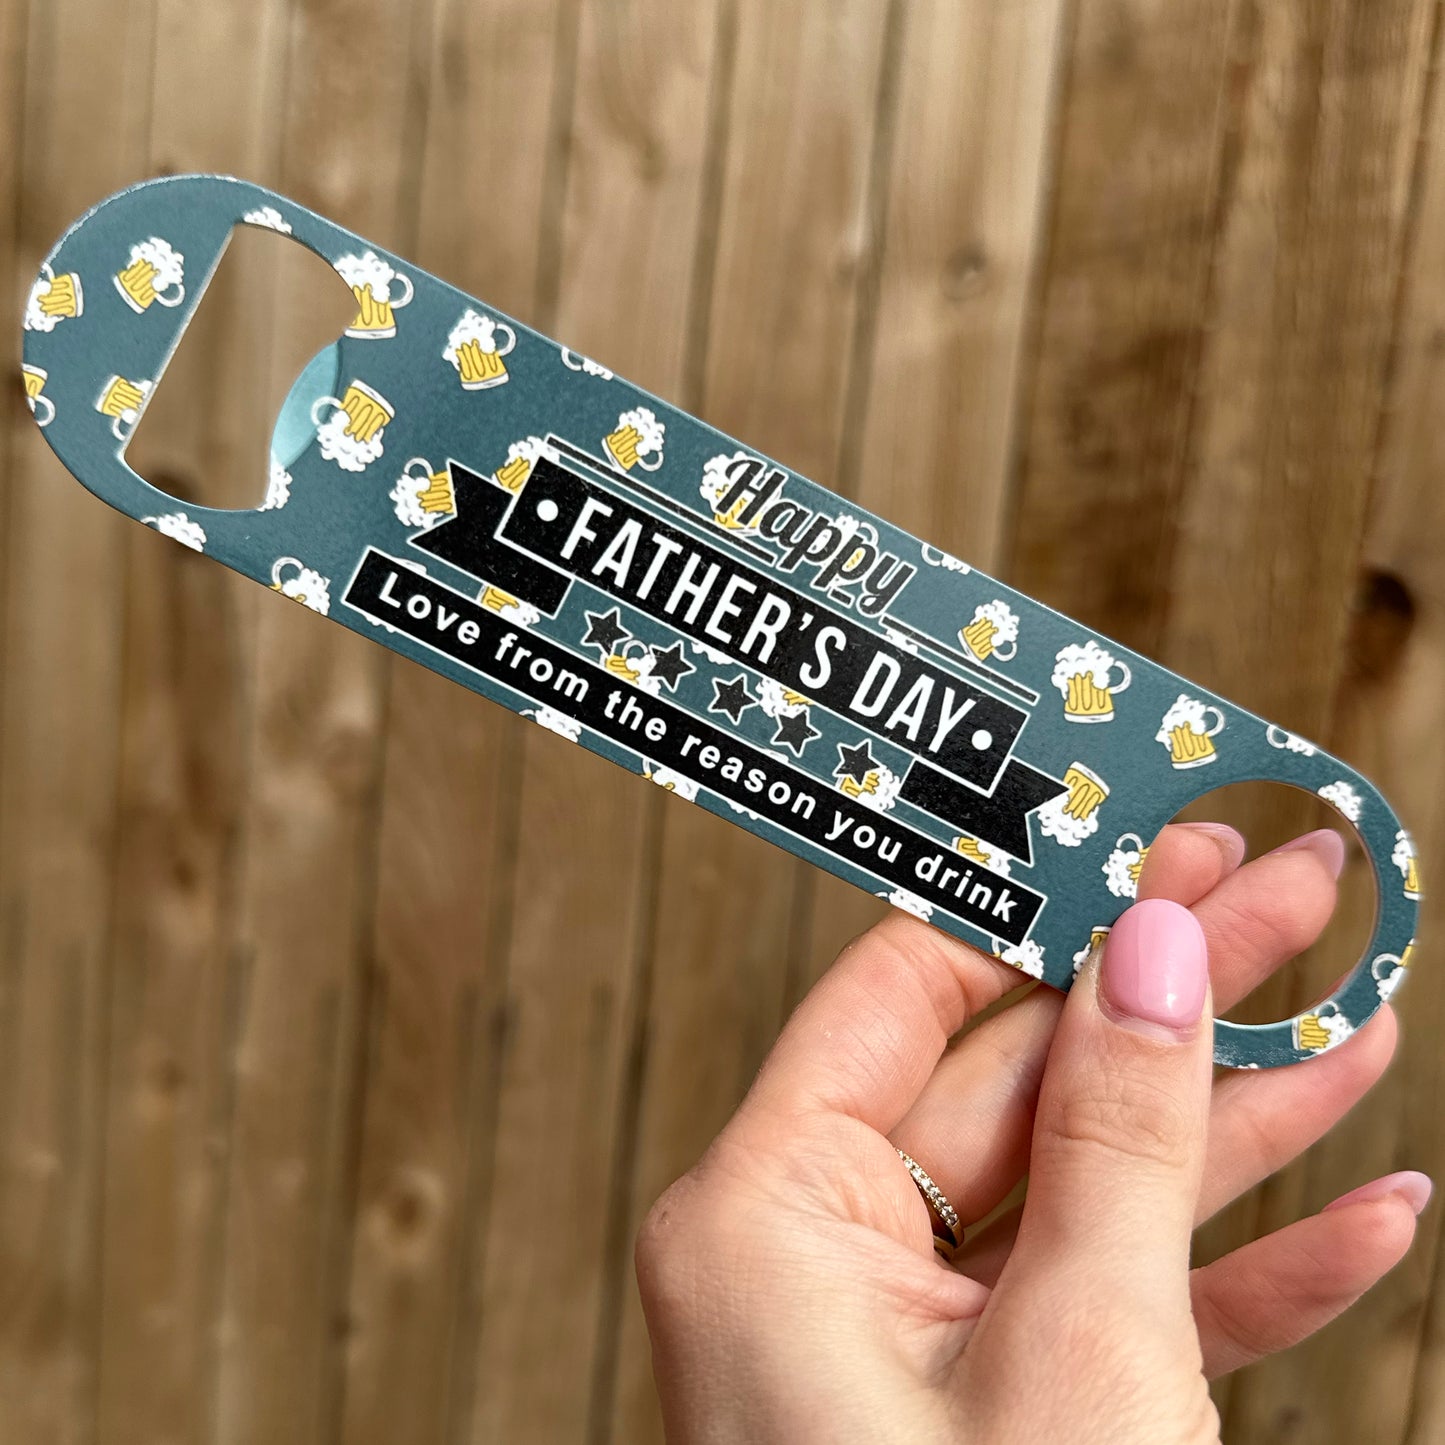 Father's Day Bottle Opener - Love From The Reason You Drink